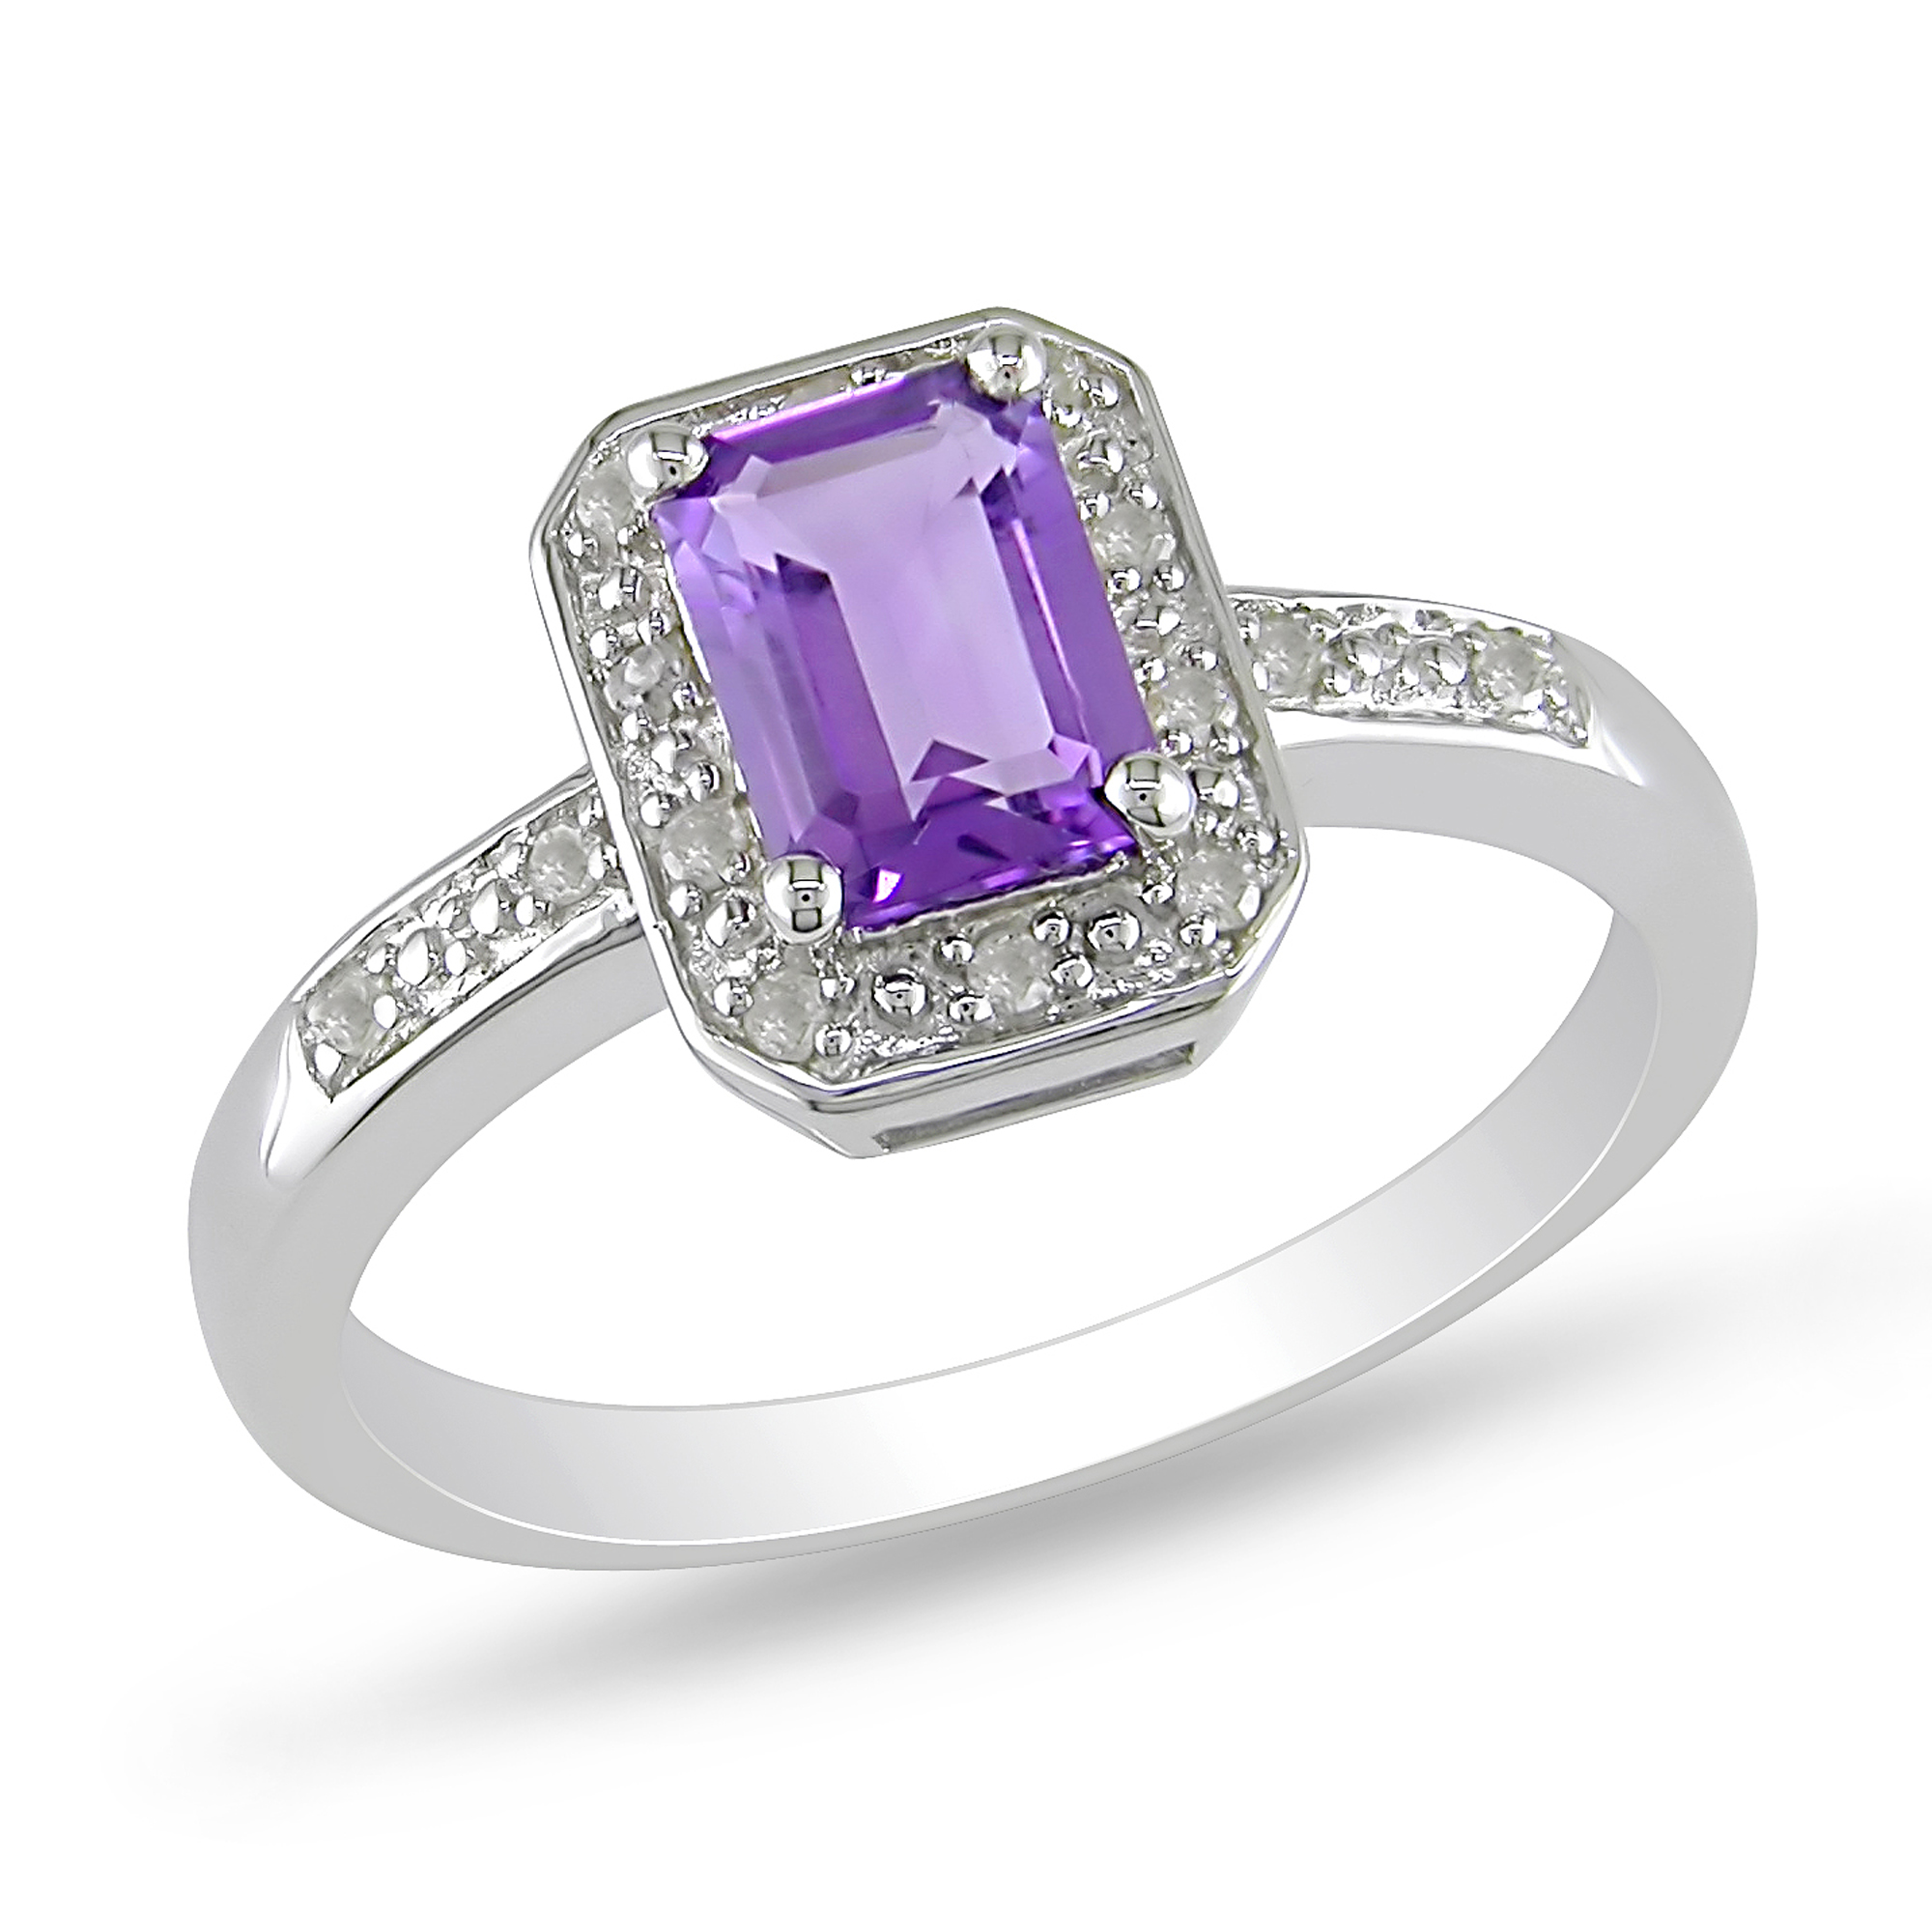 Amour 0.06 Carat T.W. Diamond and 7/8 Carat T.G.W. Amethyst Fashion Ring in Sterling Silver I3